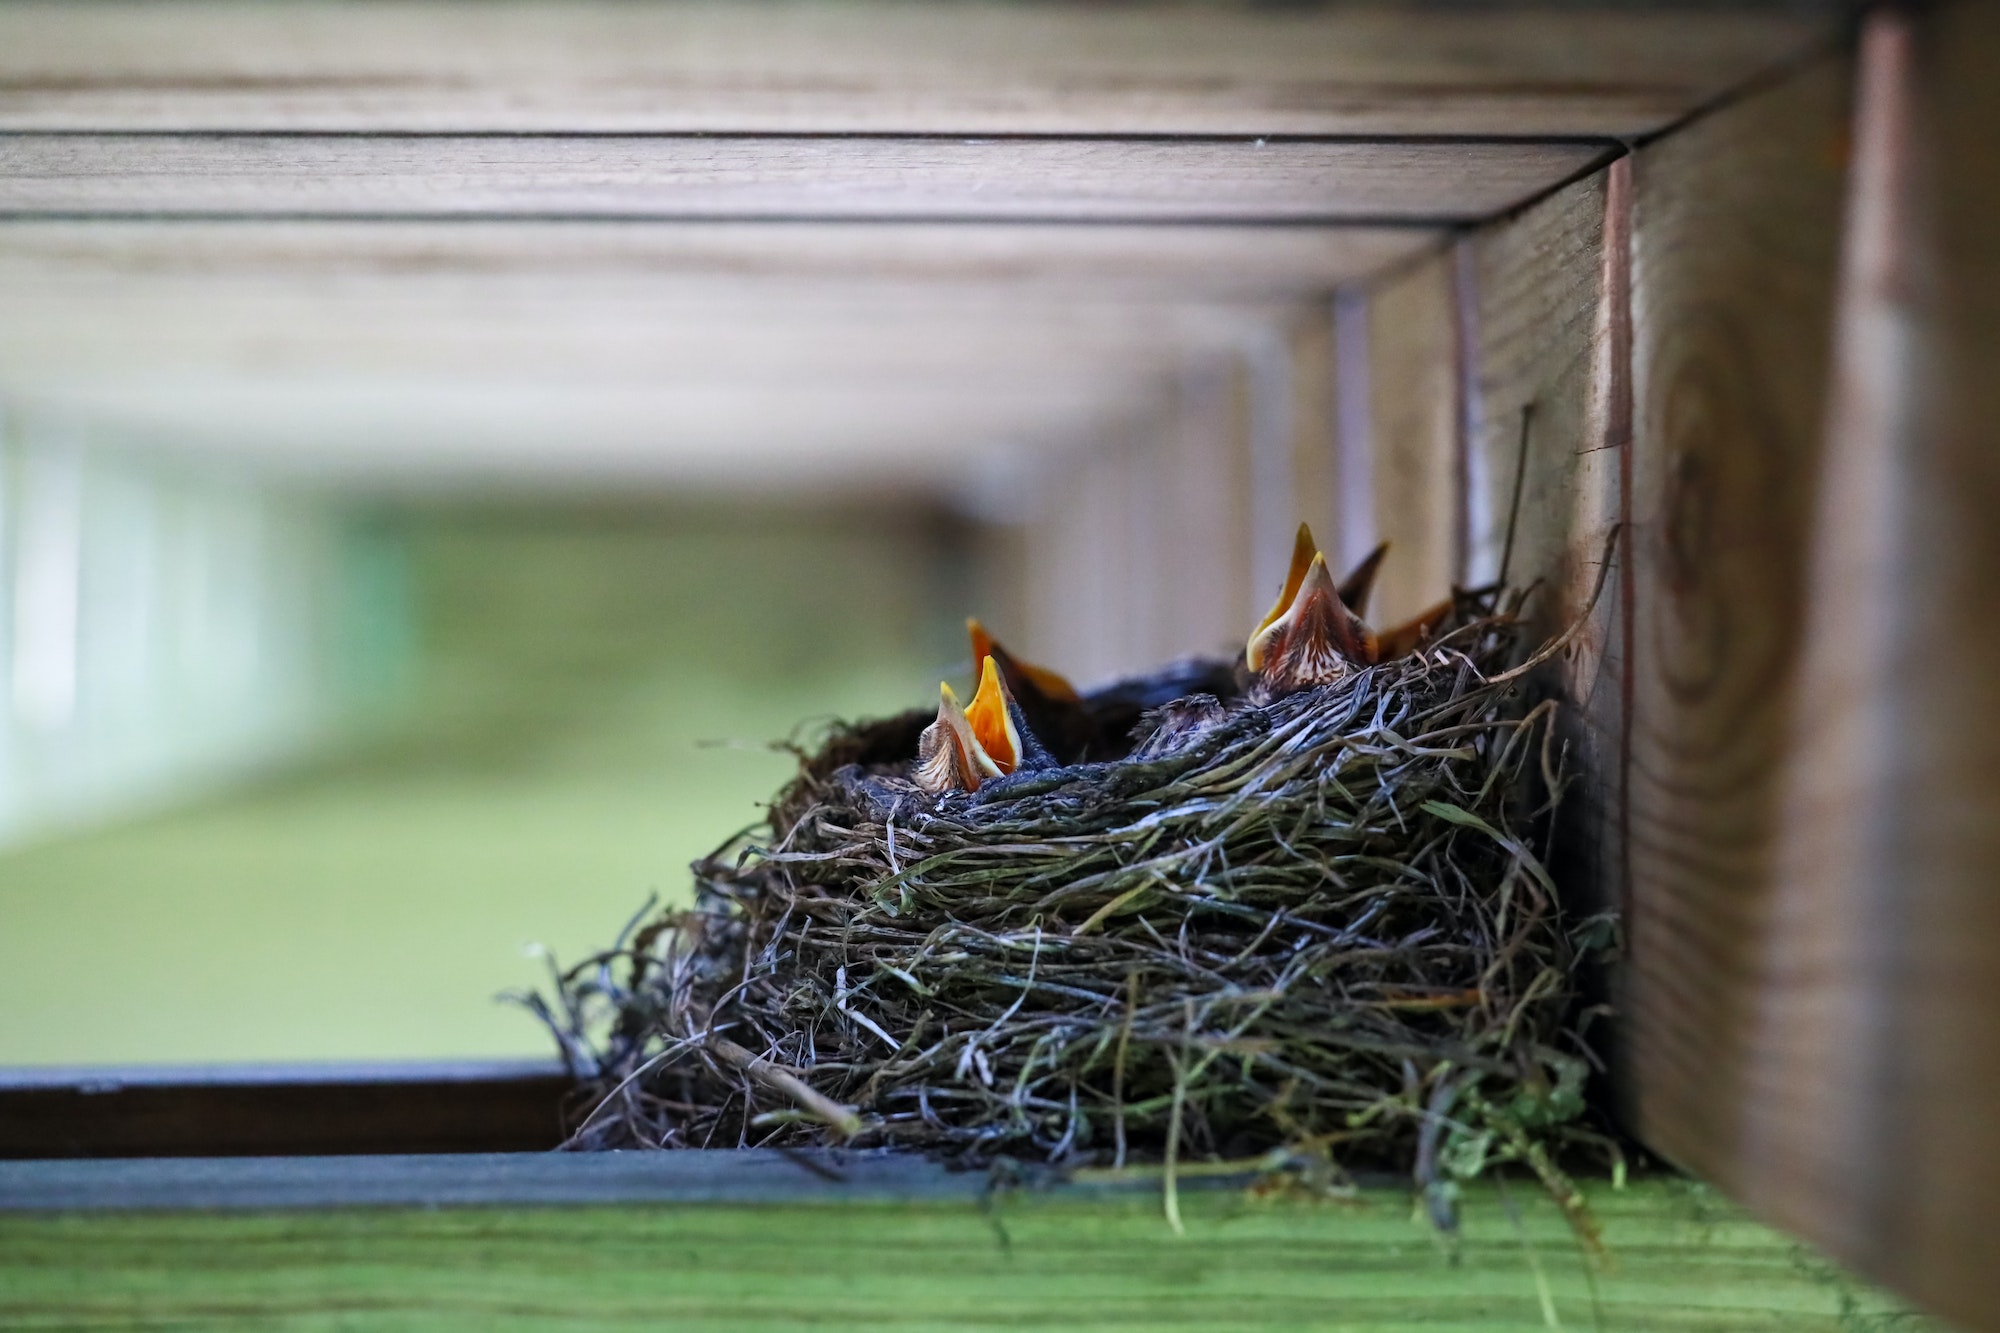 Baby robins with open beaks poking out of their nest beneath a wooden deck waiting to be fed.